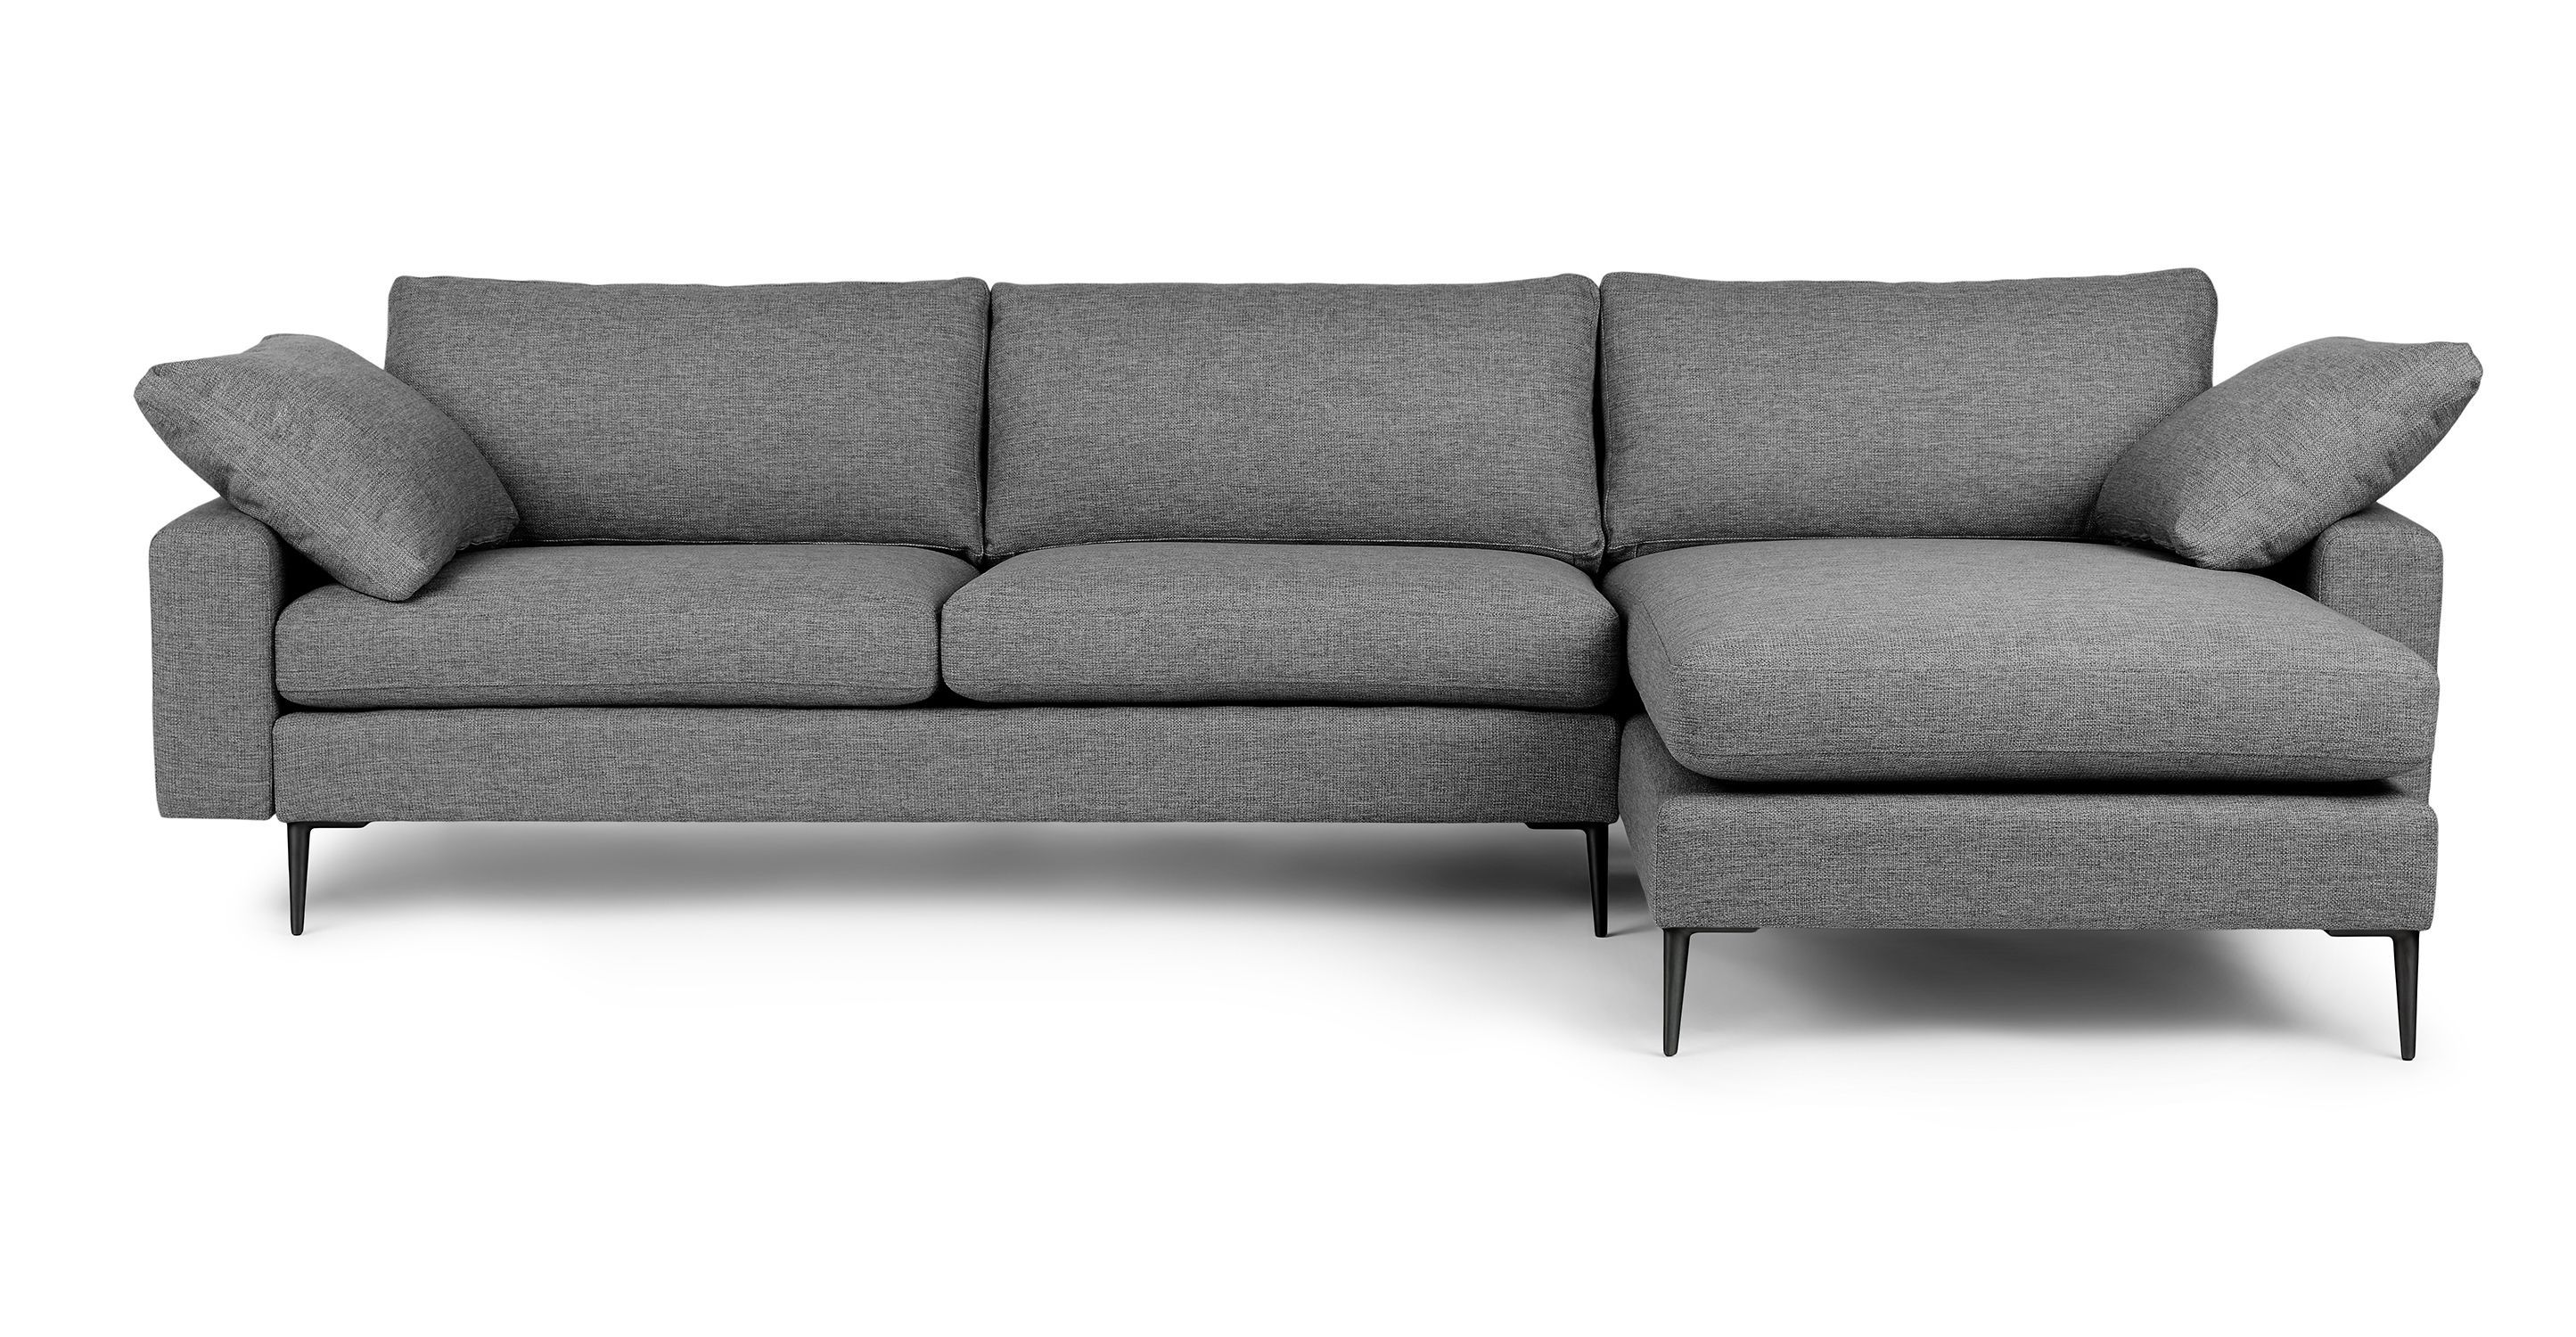 Gravel Gray Reversible Fabric Sectional | Nova | Article Within Reversible Sectional Sofas (Gallery 3 of 20)